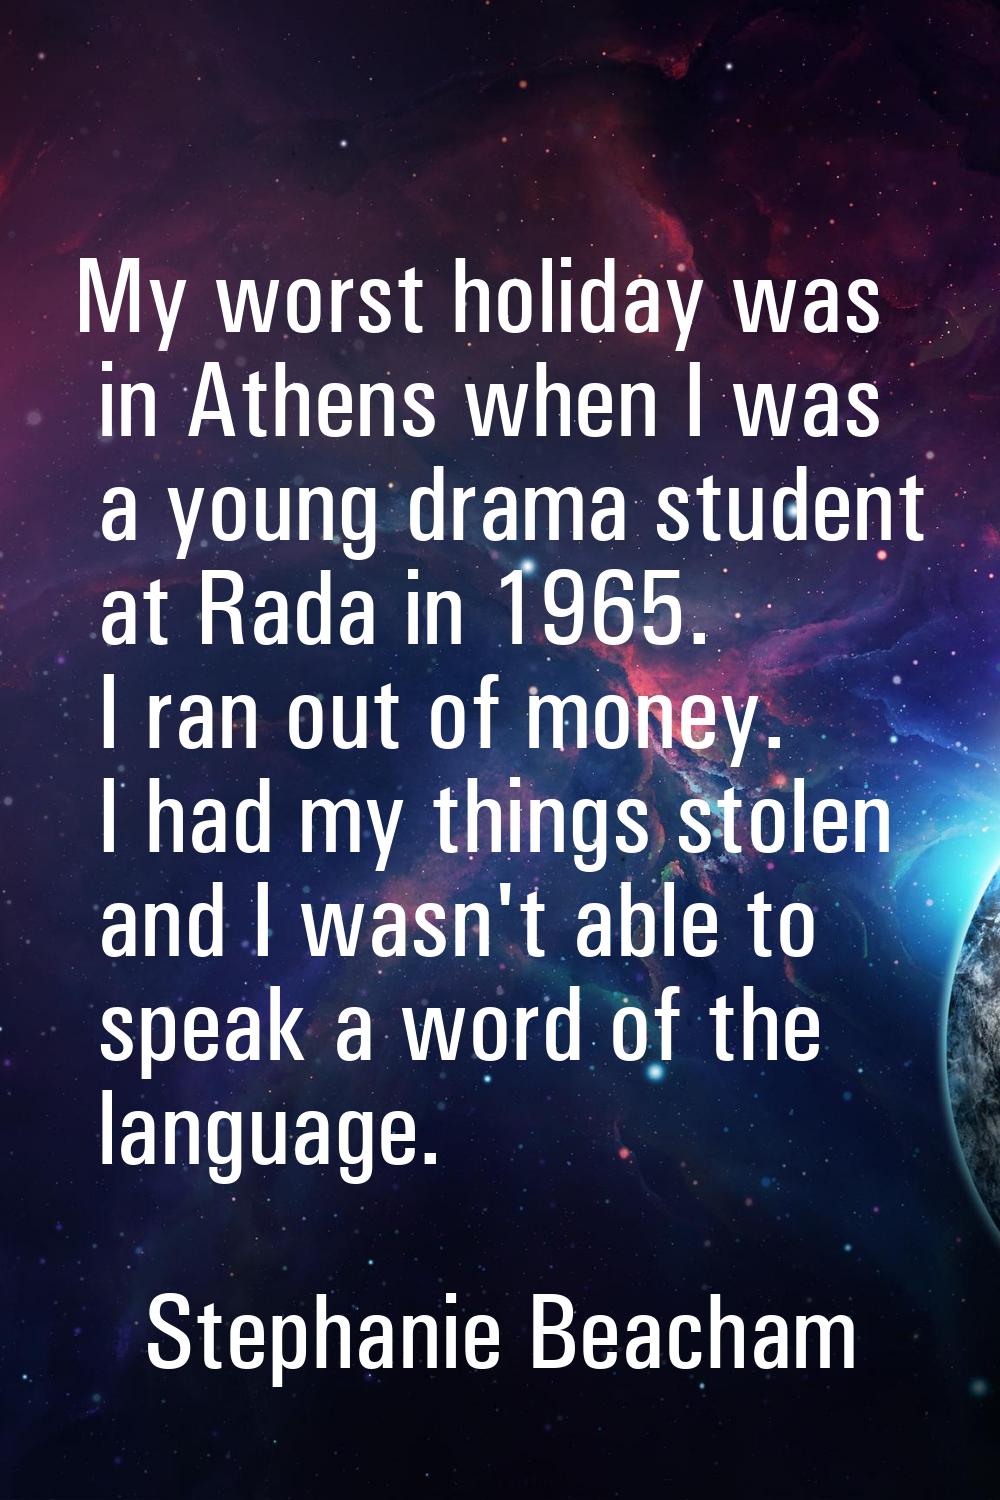 My worst holiday was in Athens when I was a young drama student at Rada in 1965. I ran out of money